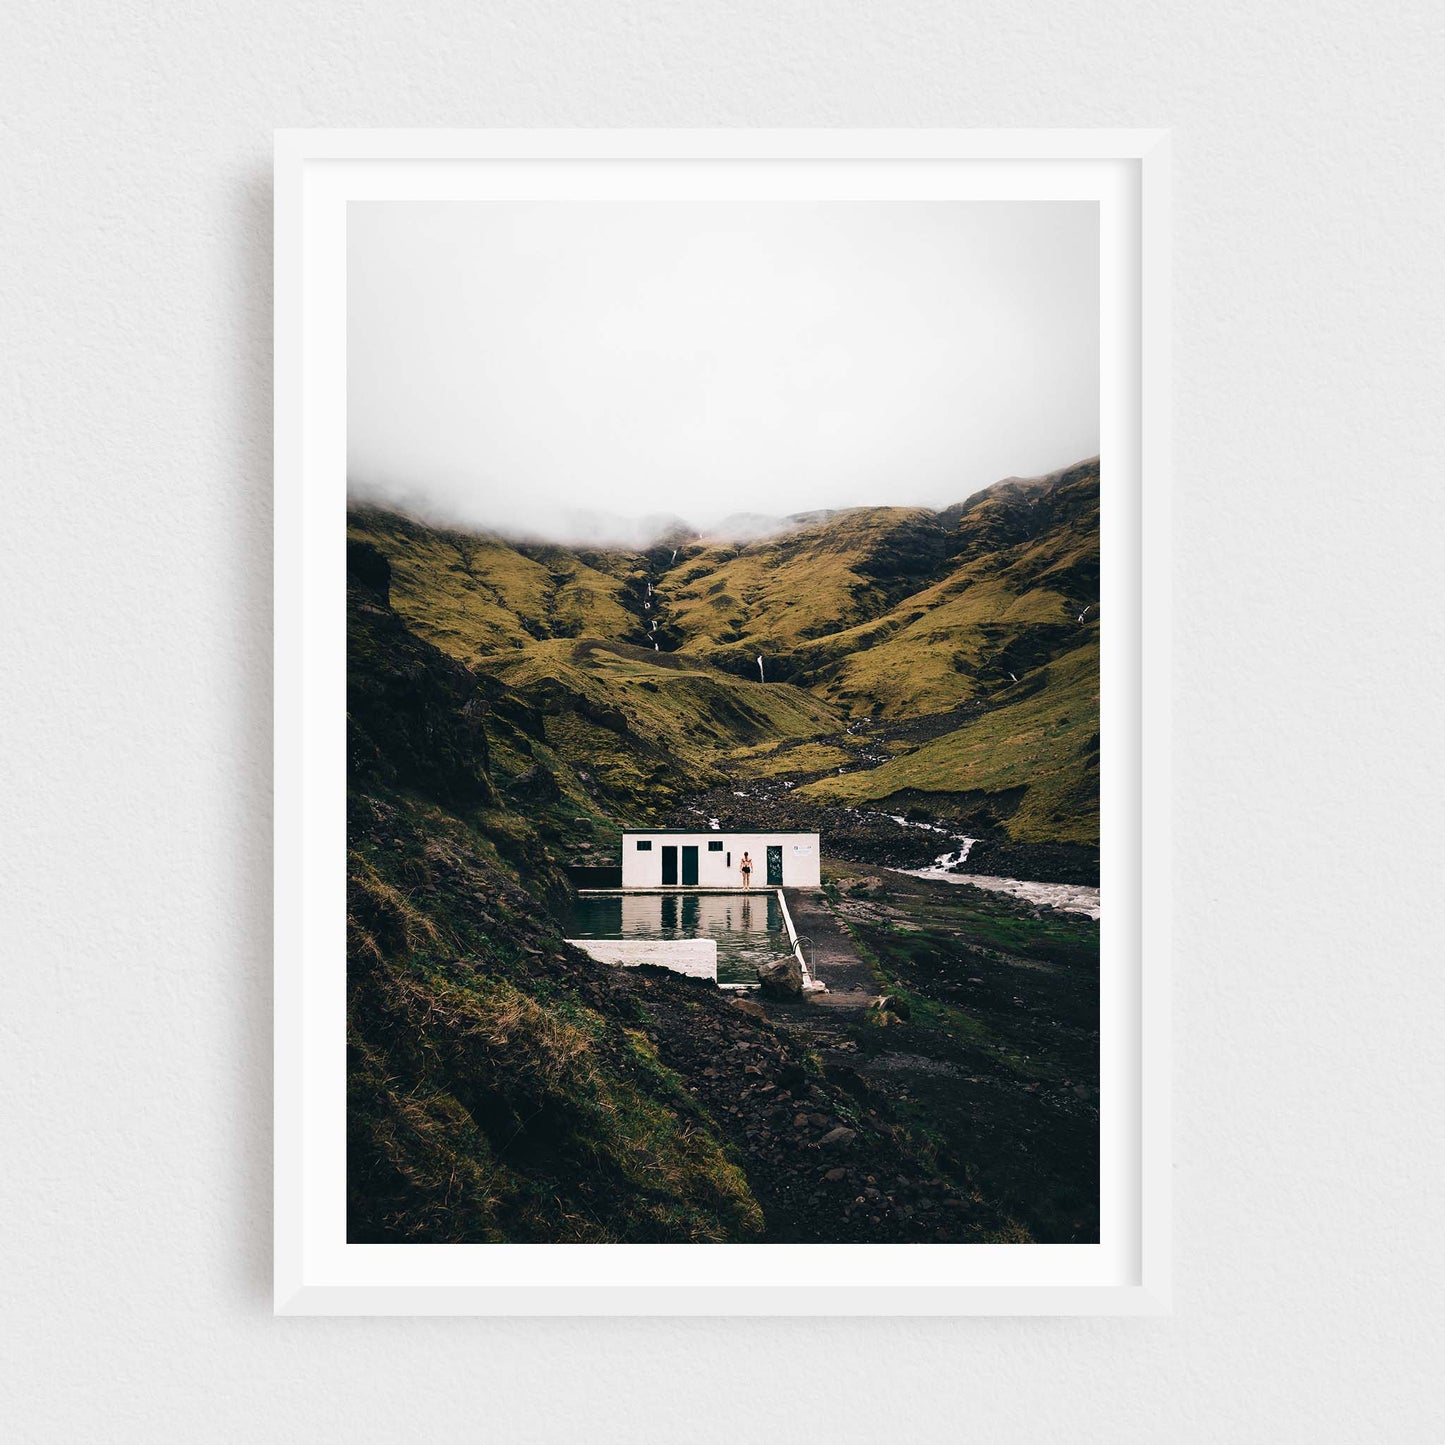 Iceland fine art photography print featuring Seljavallalaug pool, in a white frame